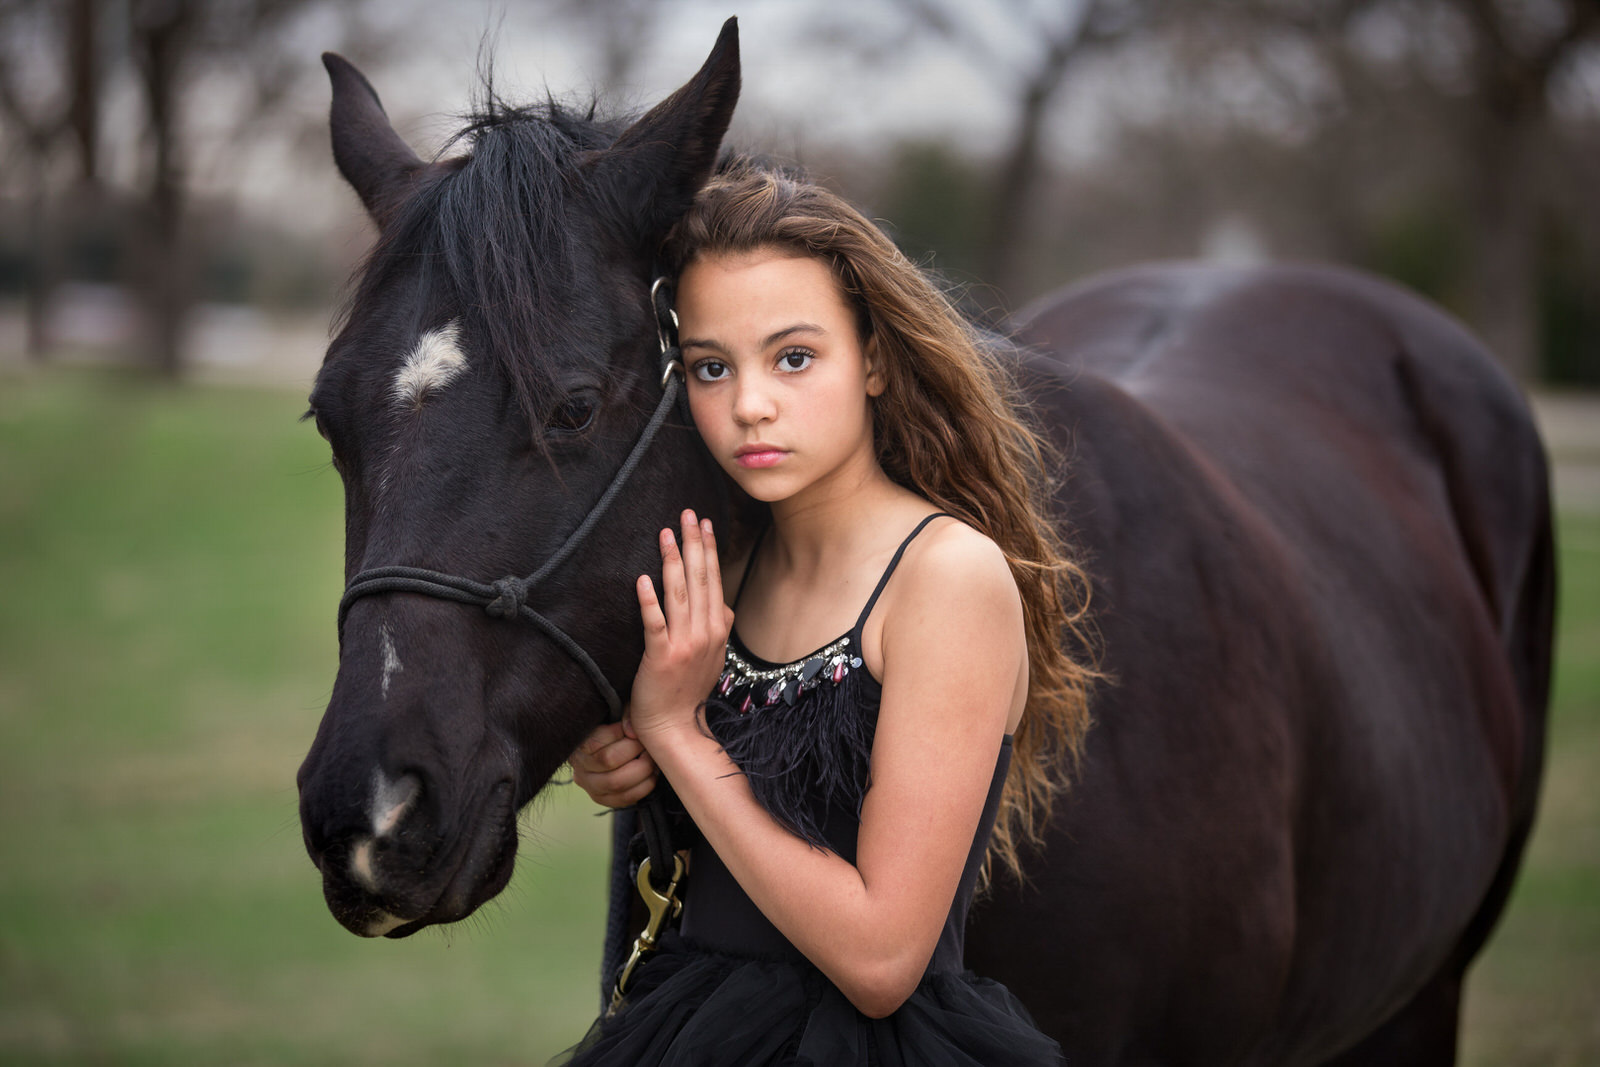 A young girl in a black dress leans against a black horse things to do in dfw with kids